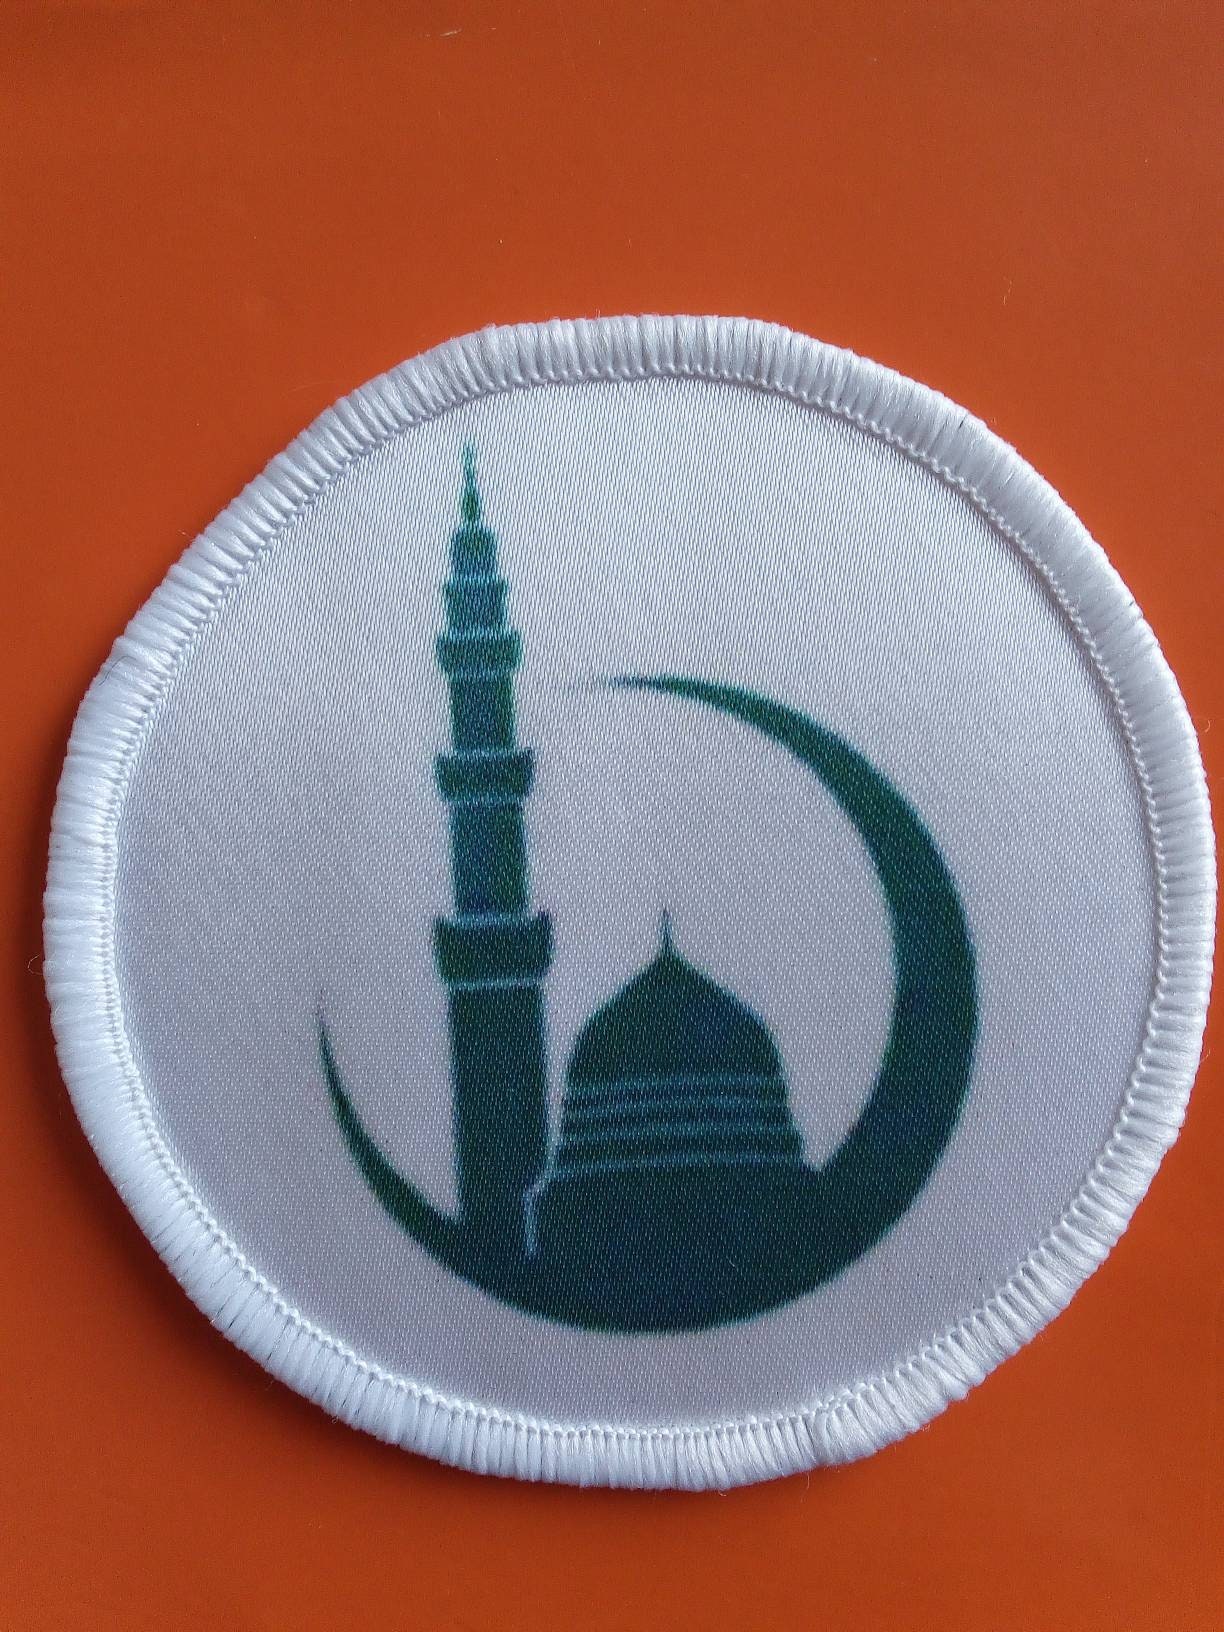 Muslim Badge Button Pin Keep Calm and (Big Size 2.25inch/58mm) Islam Gift No 6